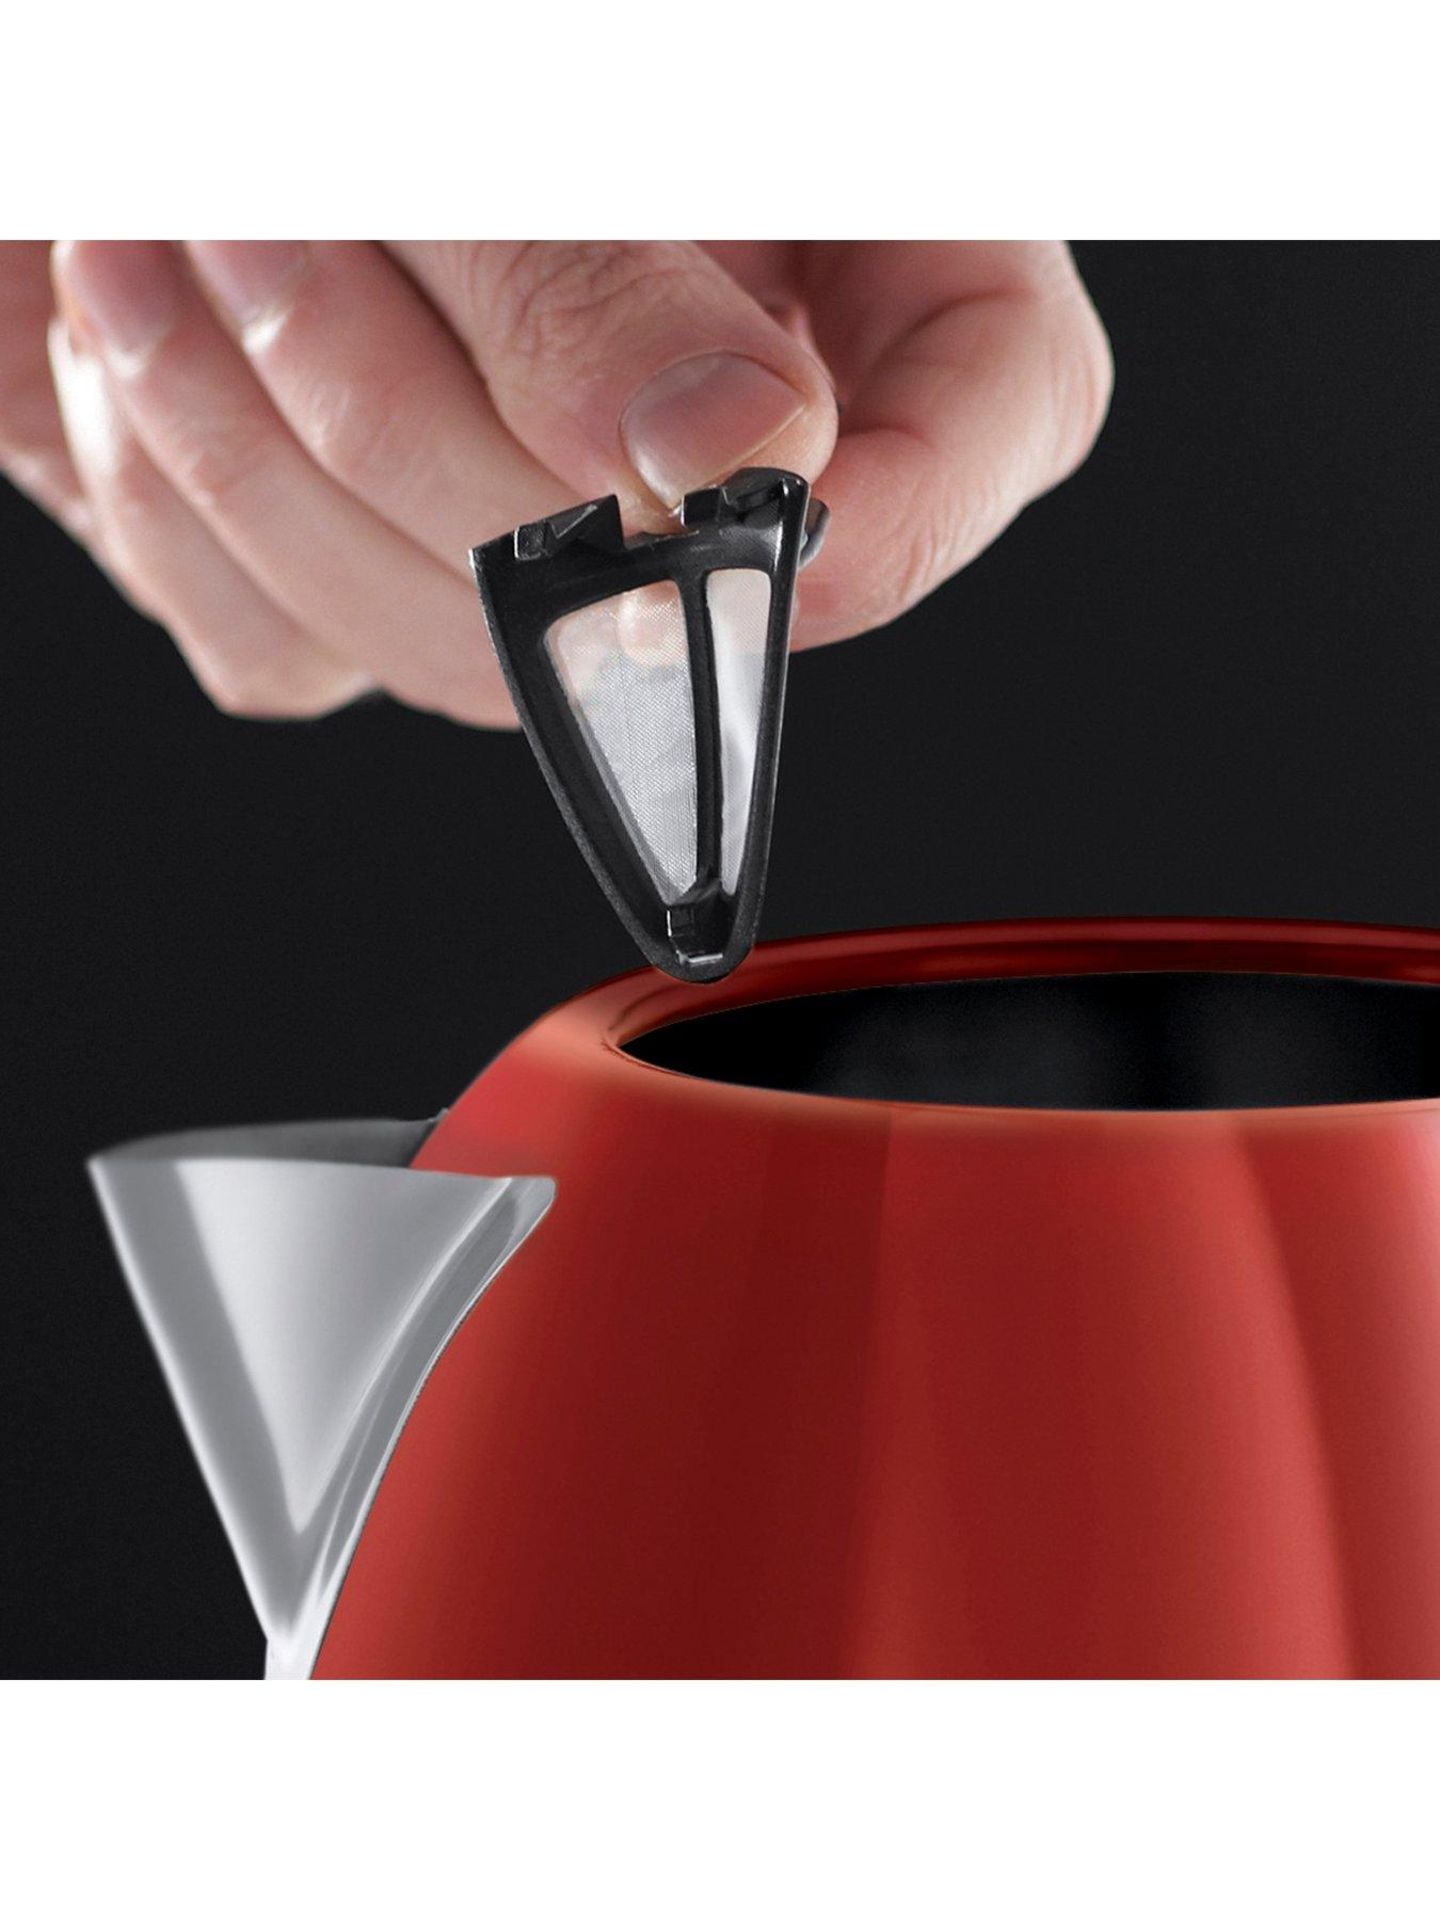 V Brand New Russel Hobbs Red Dorchester Kettle - Perfect Pour - Saves Up To 70% Energy - Littlewoods - Image 2 of 5